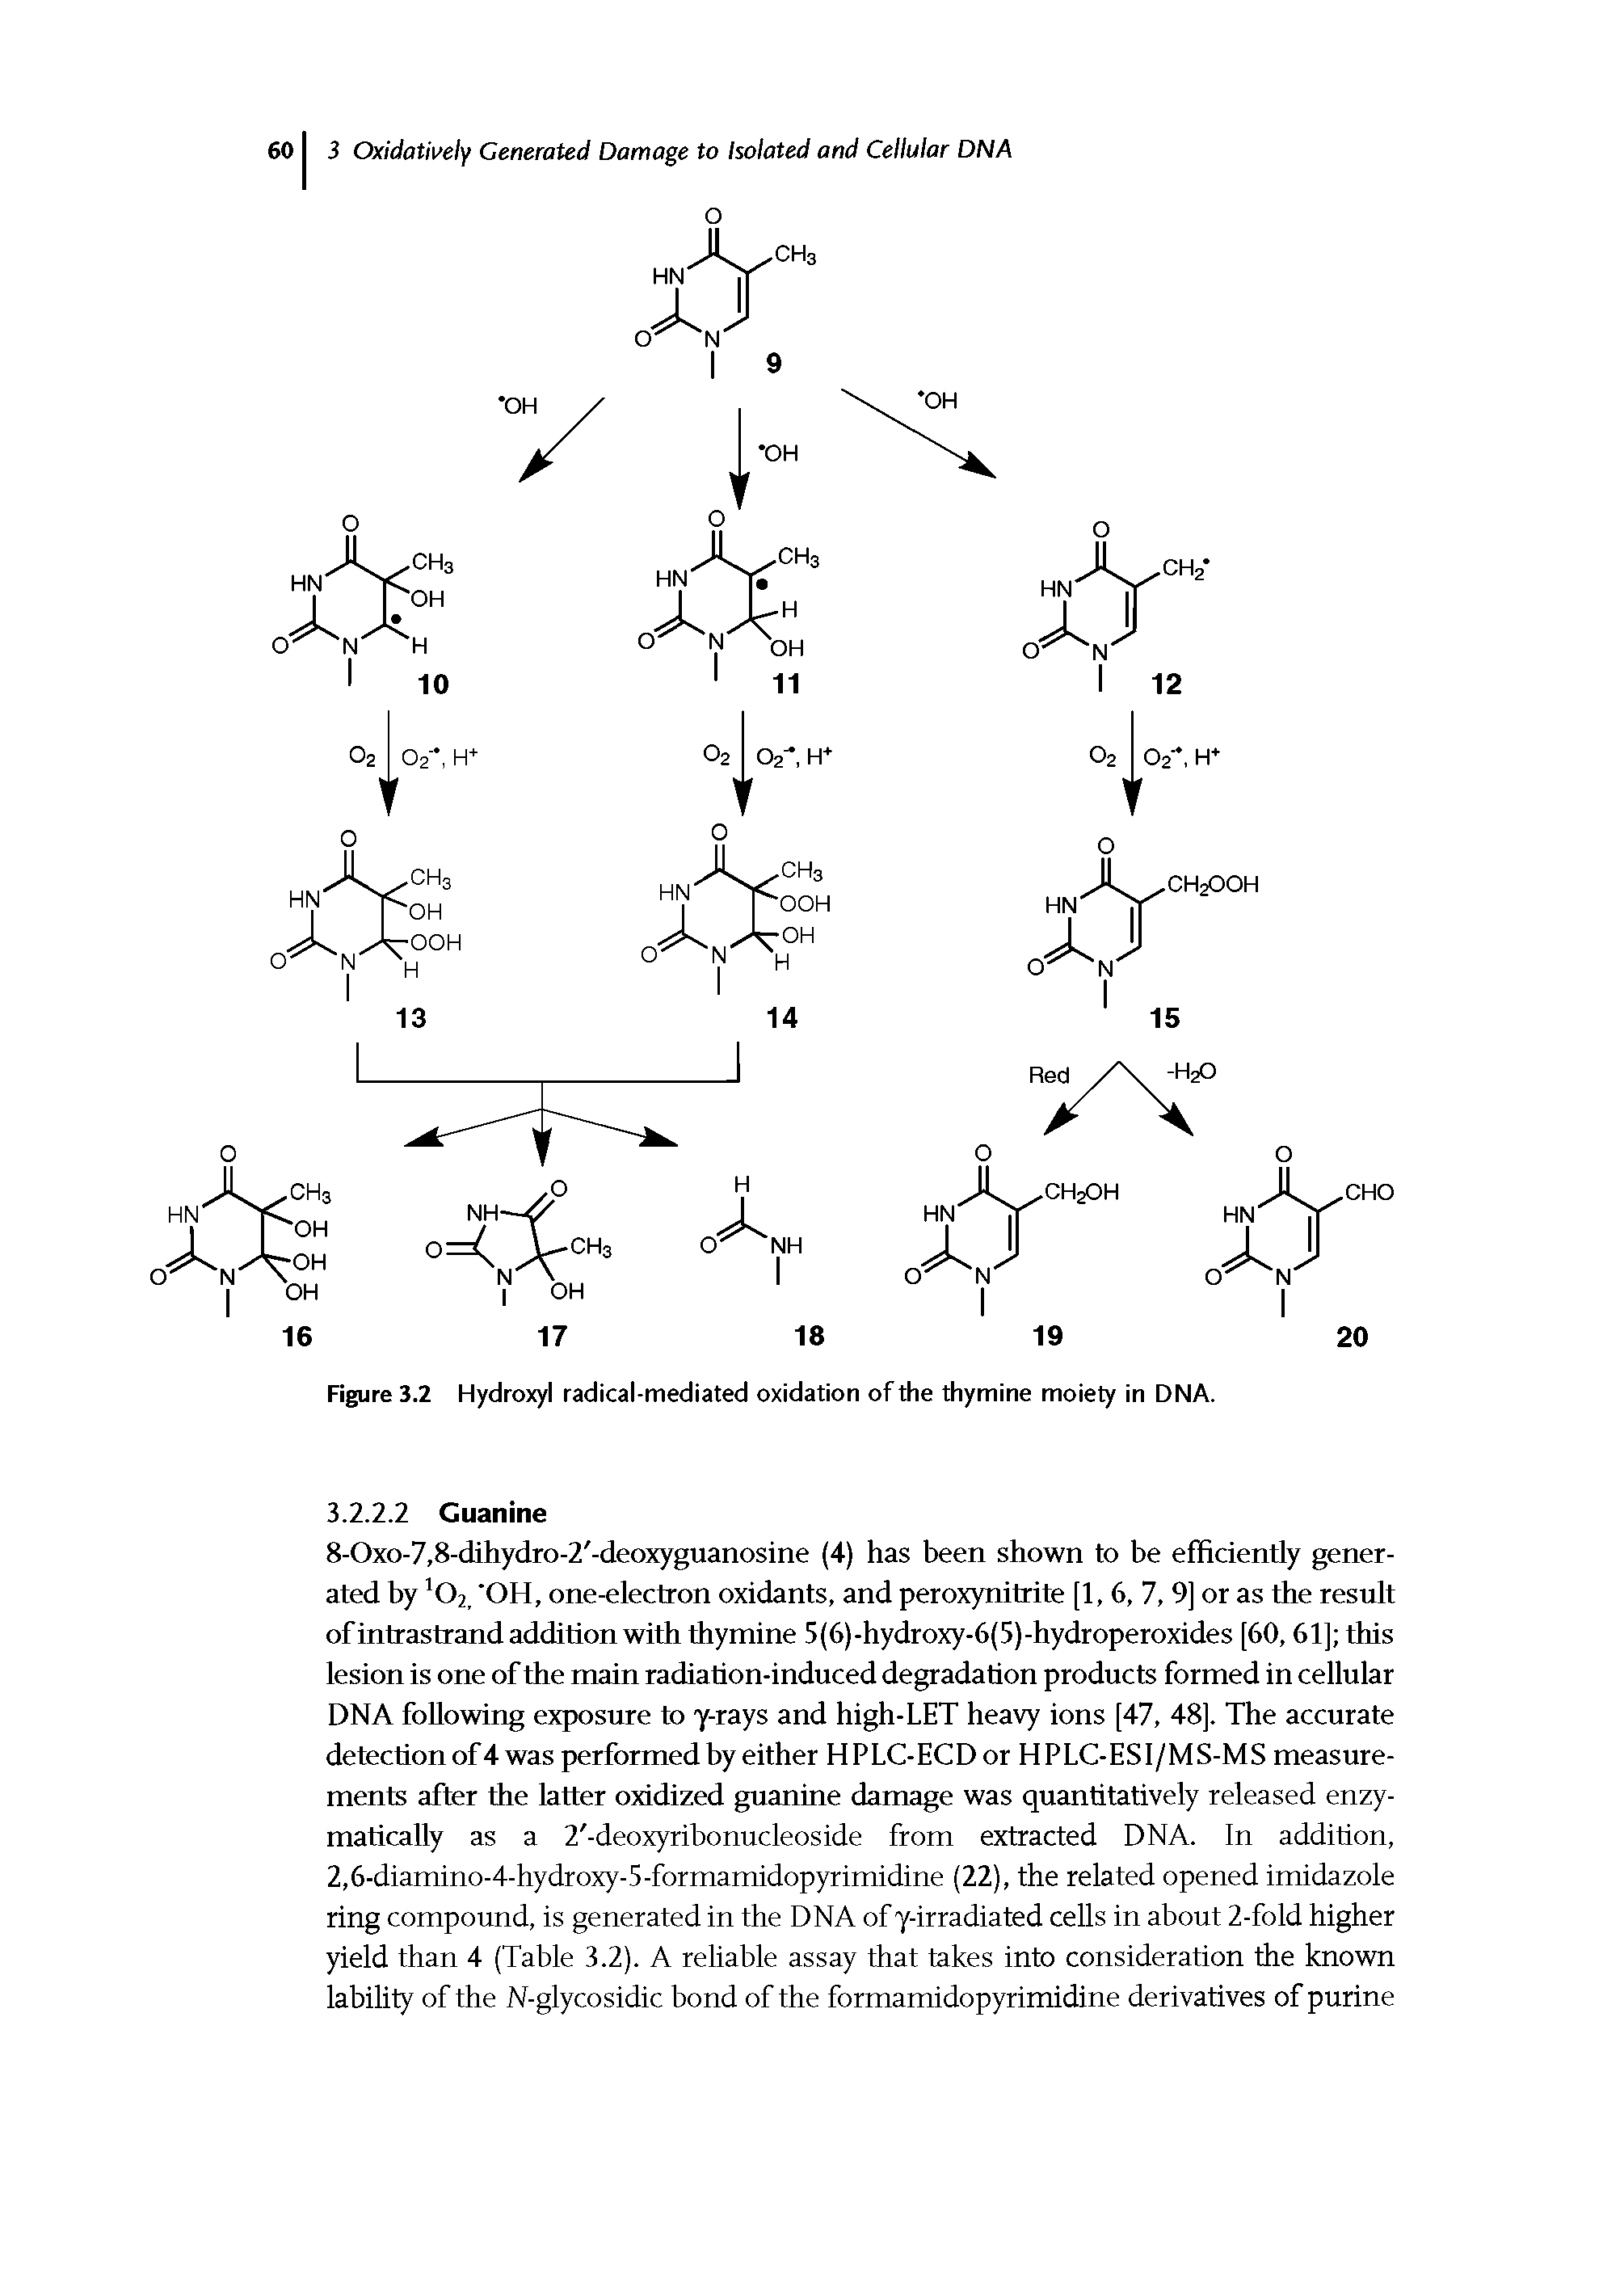 Figure 3.2 Hydroxyl radical-mediated oxidation of the thymine moiety in DNA.